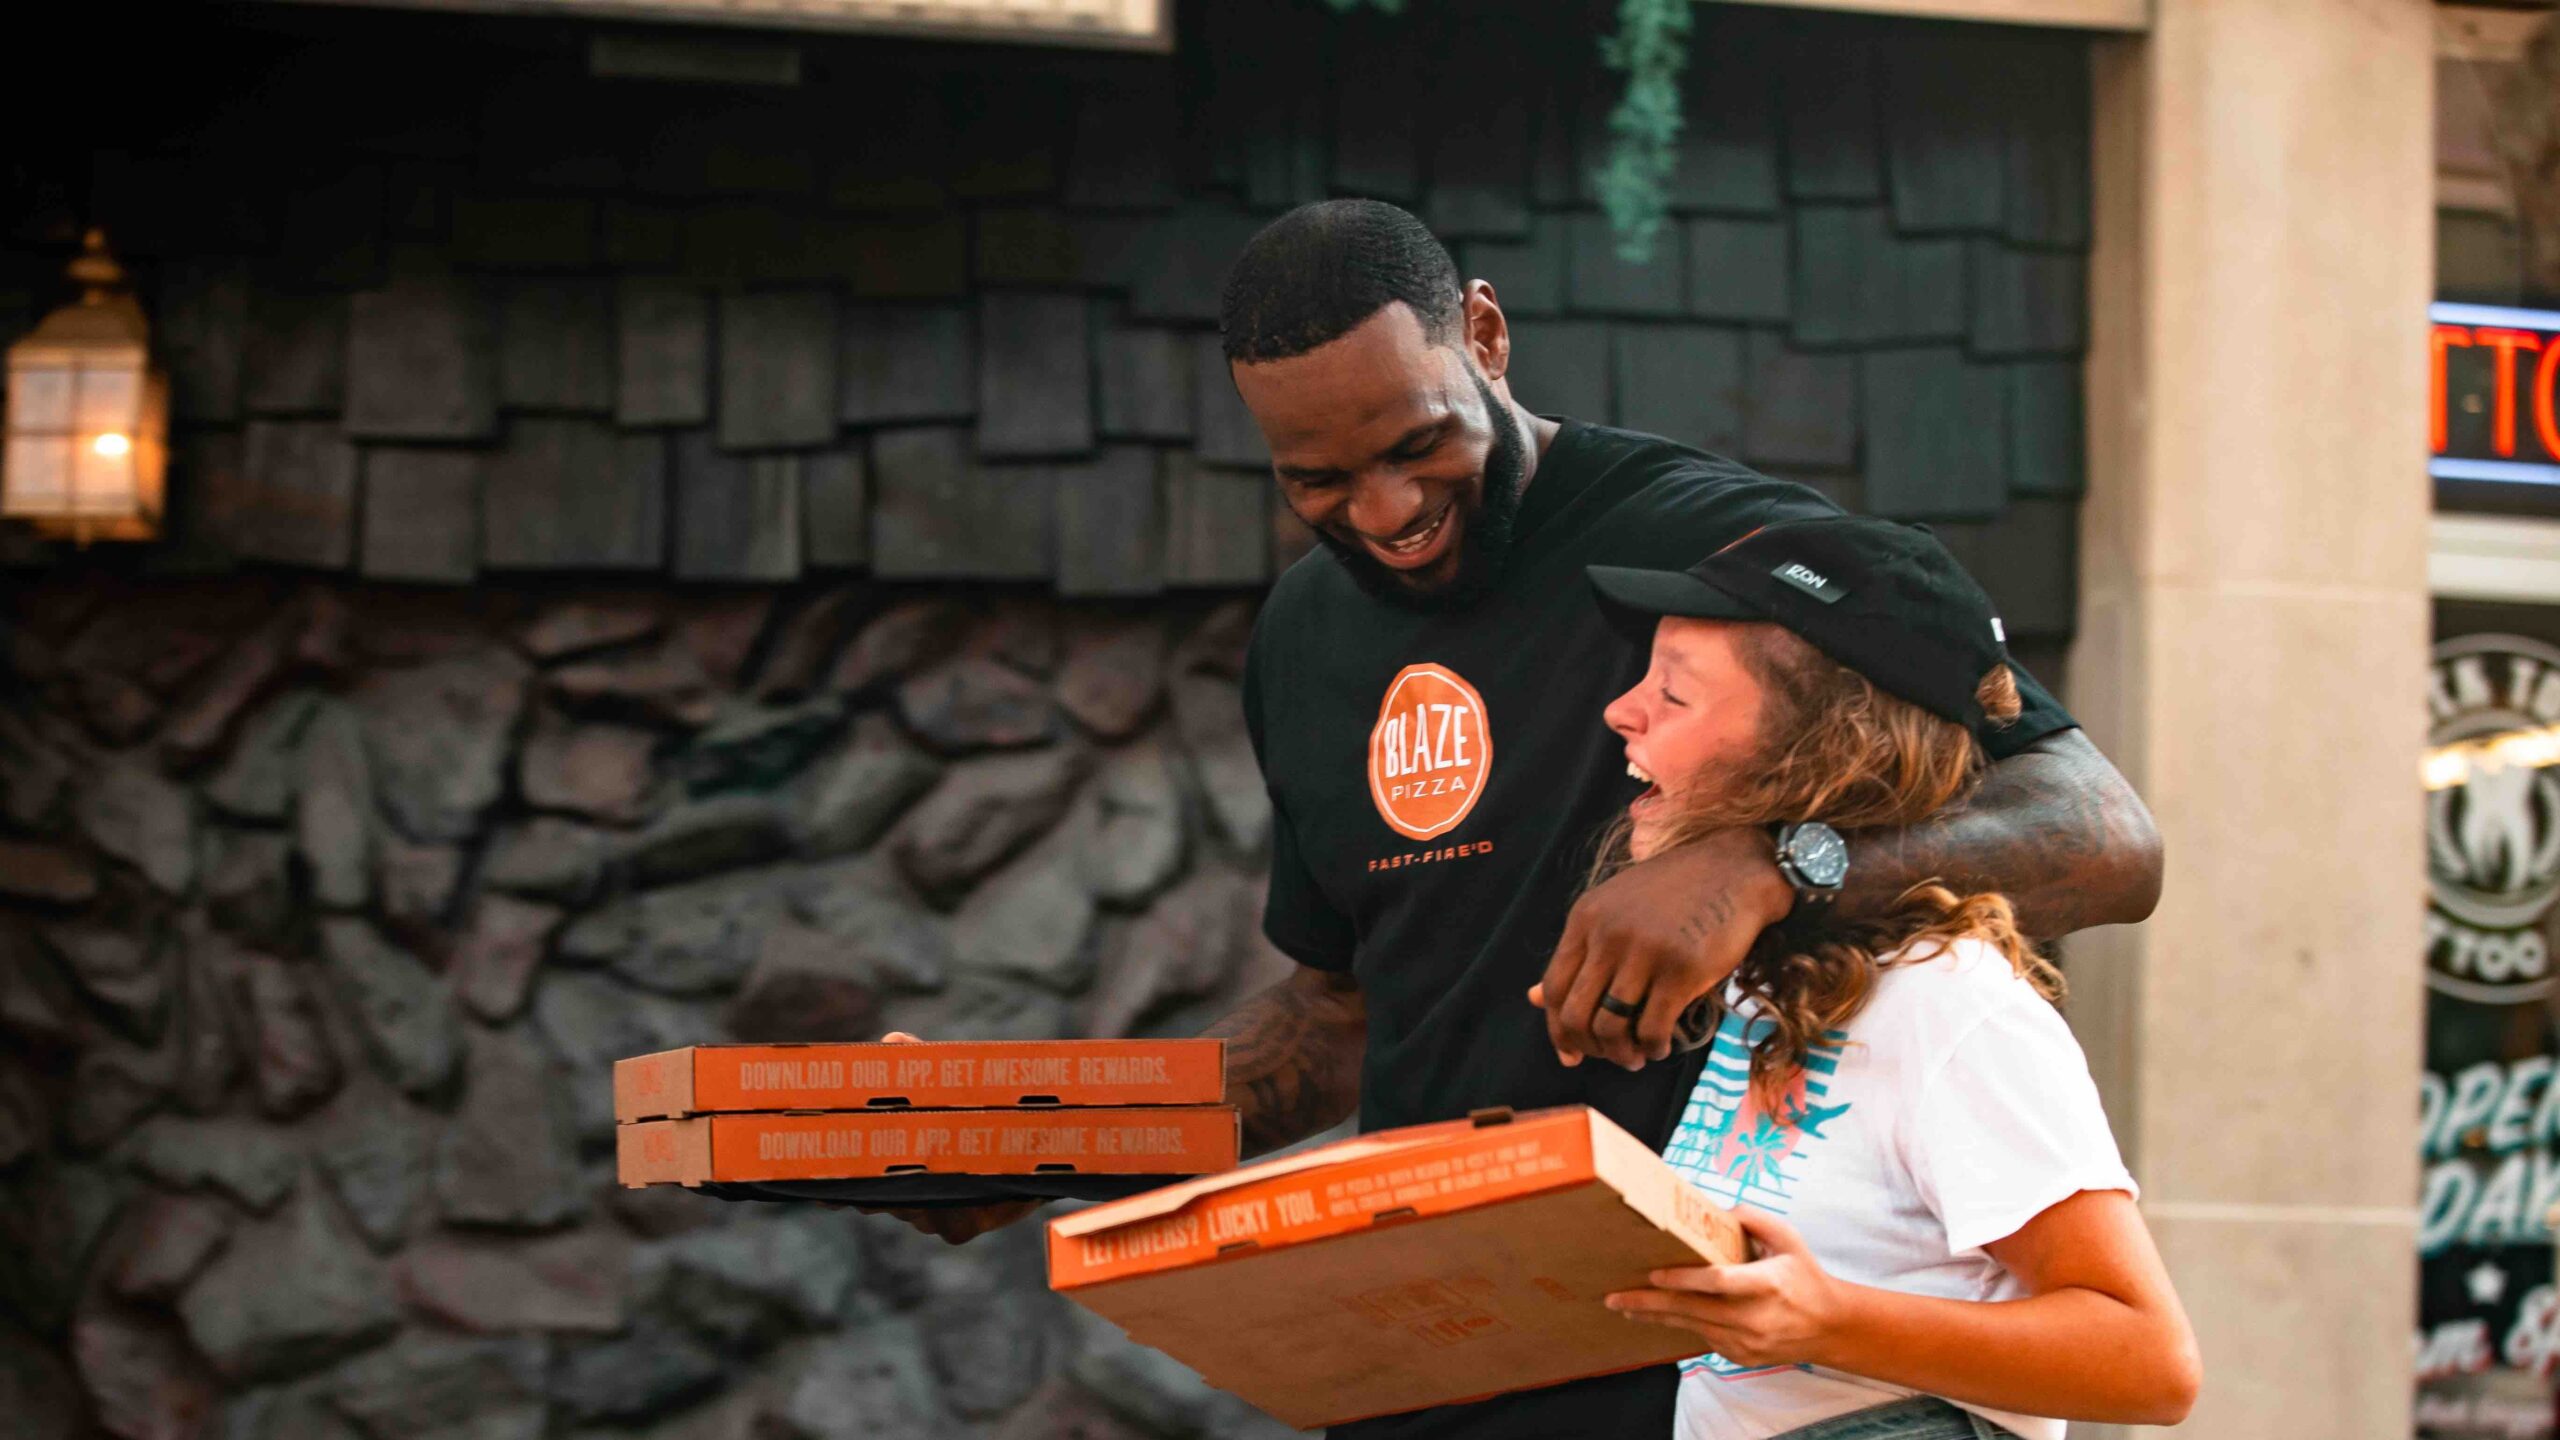 LeBron James Passed Out Pizza On The Street While Pretending To Be A Delivery Guy